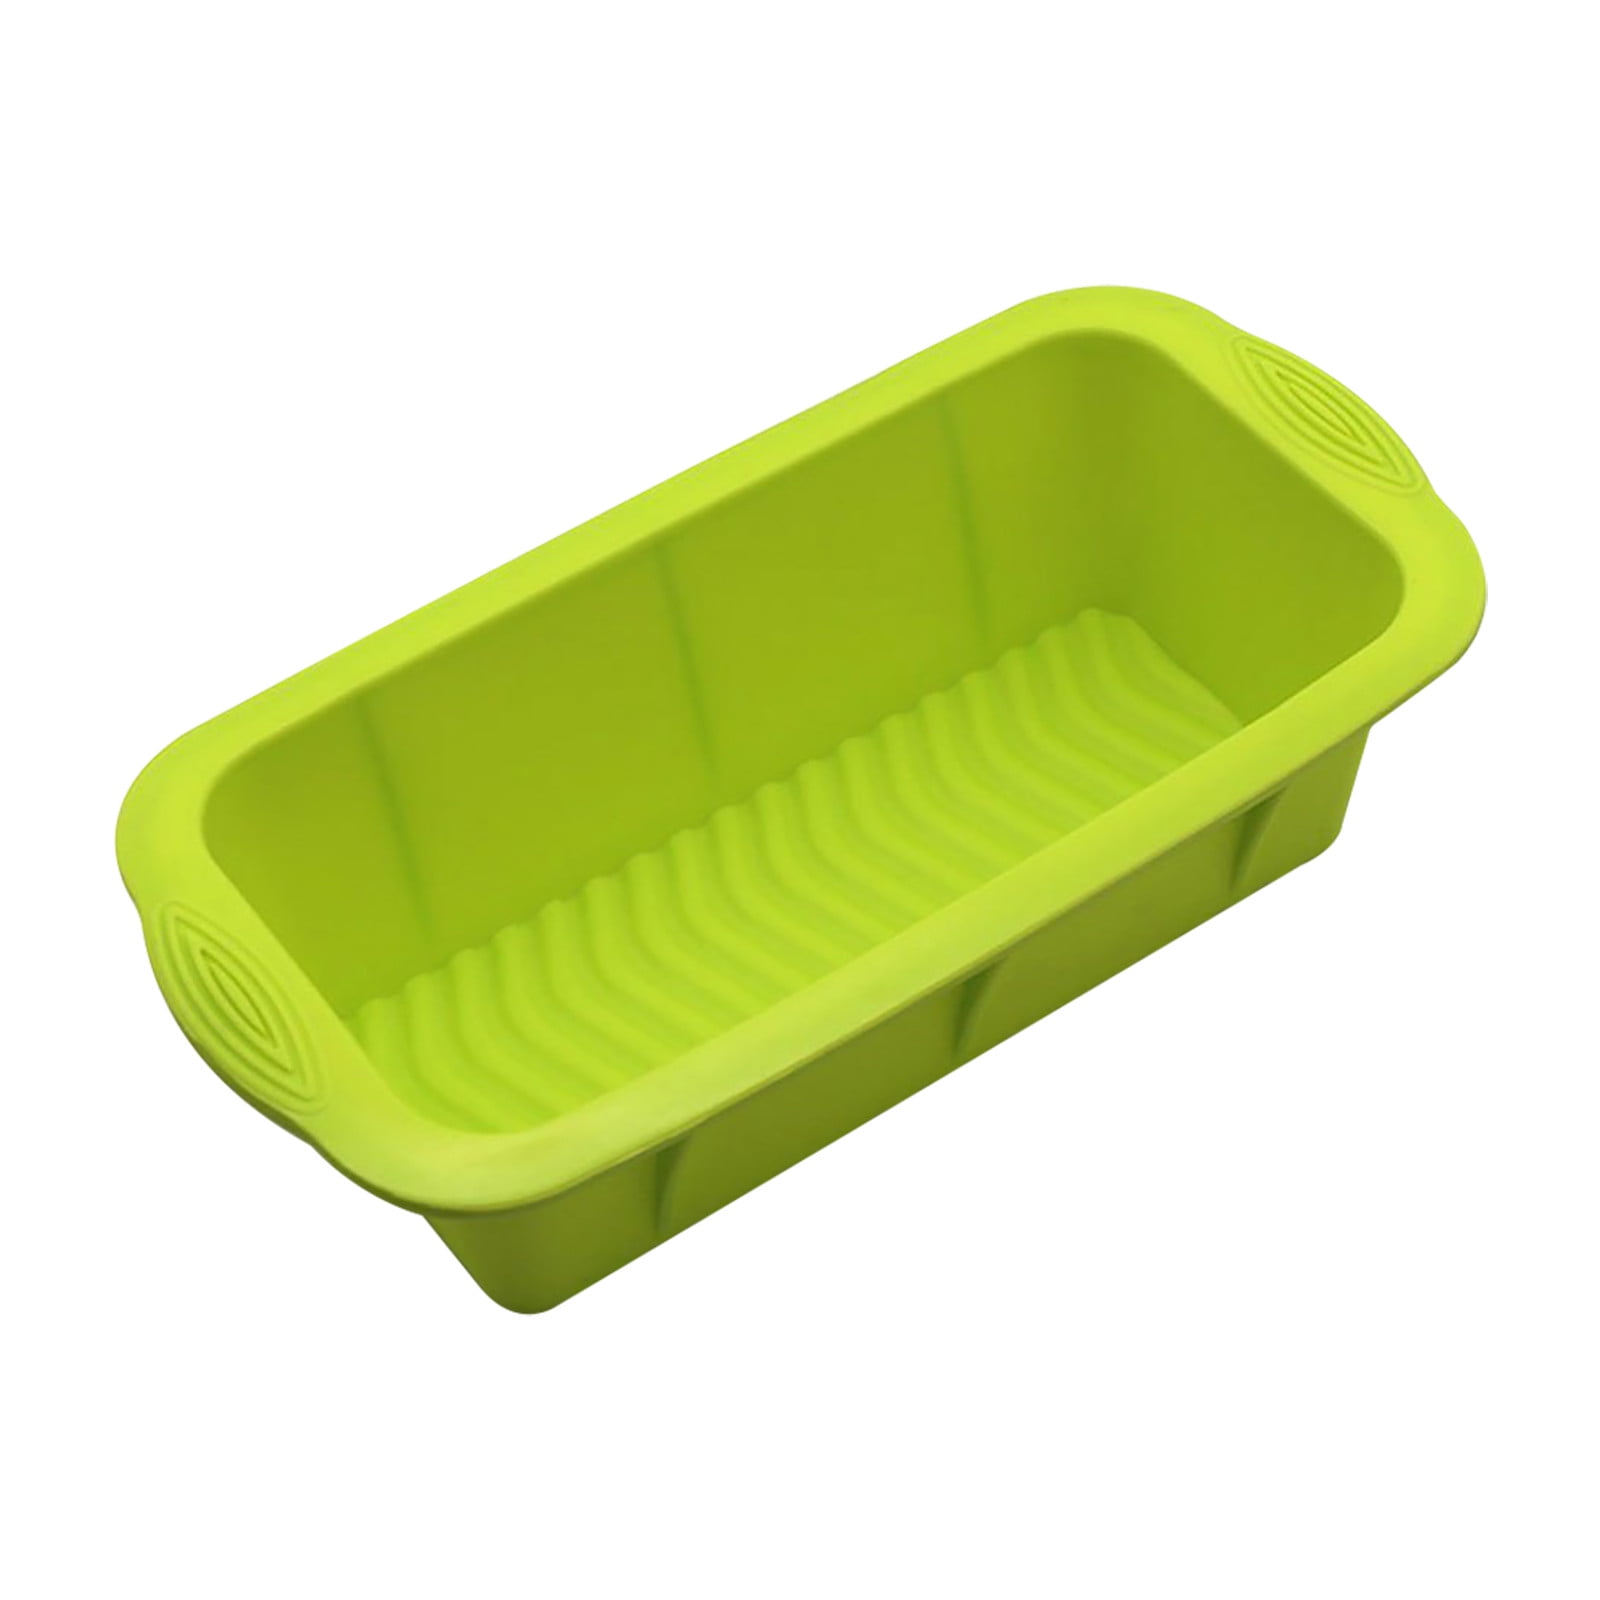 Vikakiooze Silicone Loaf Pan, Non Stick and Easy To Release Rectangular  Silicone Mini Cake Plate for Baking Bread, Flexible Bpa Free Silicone  Baking